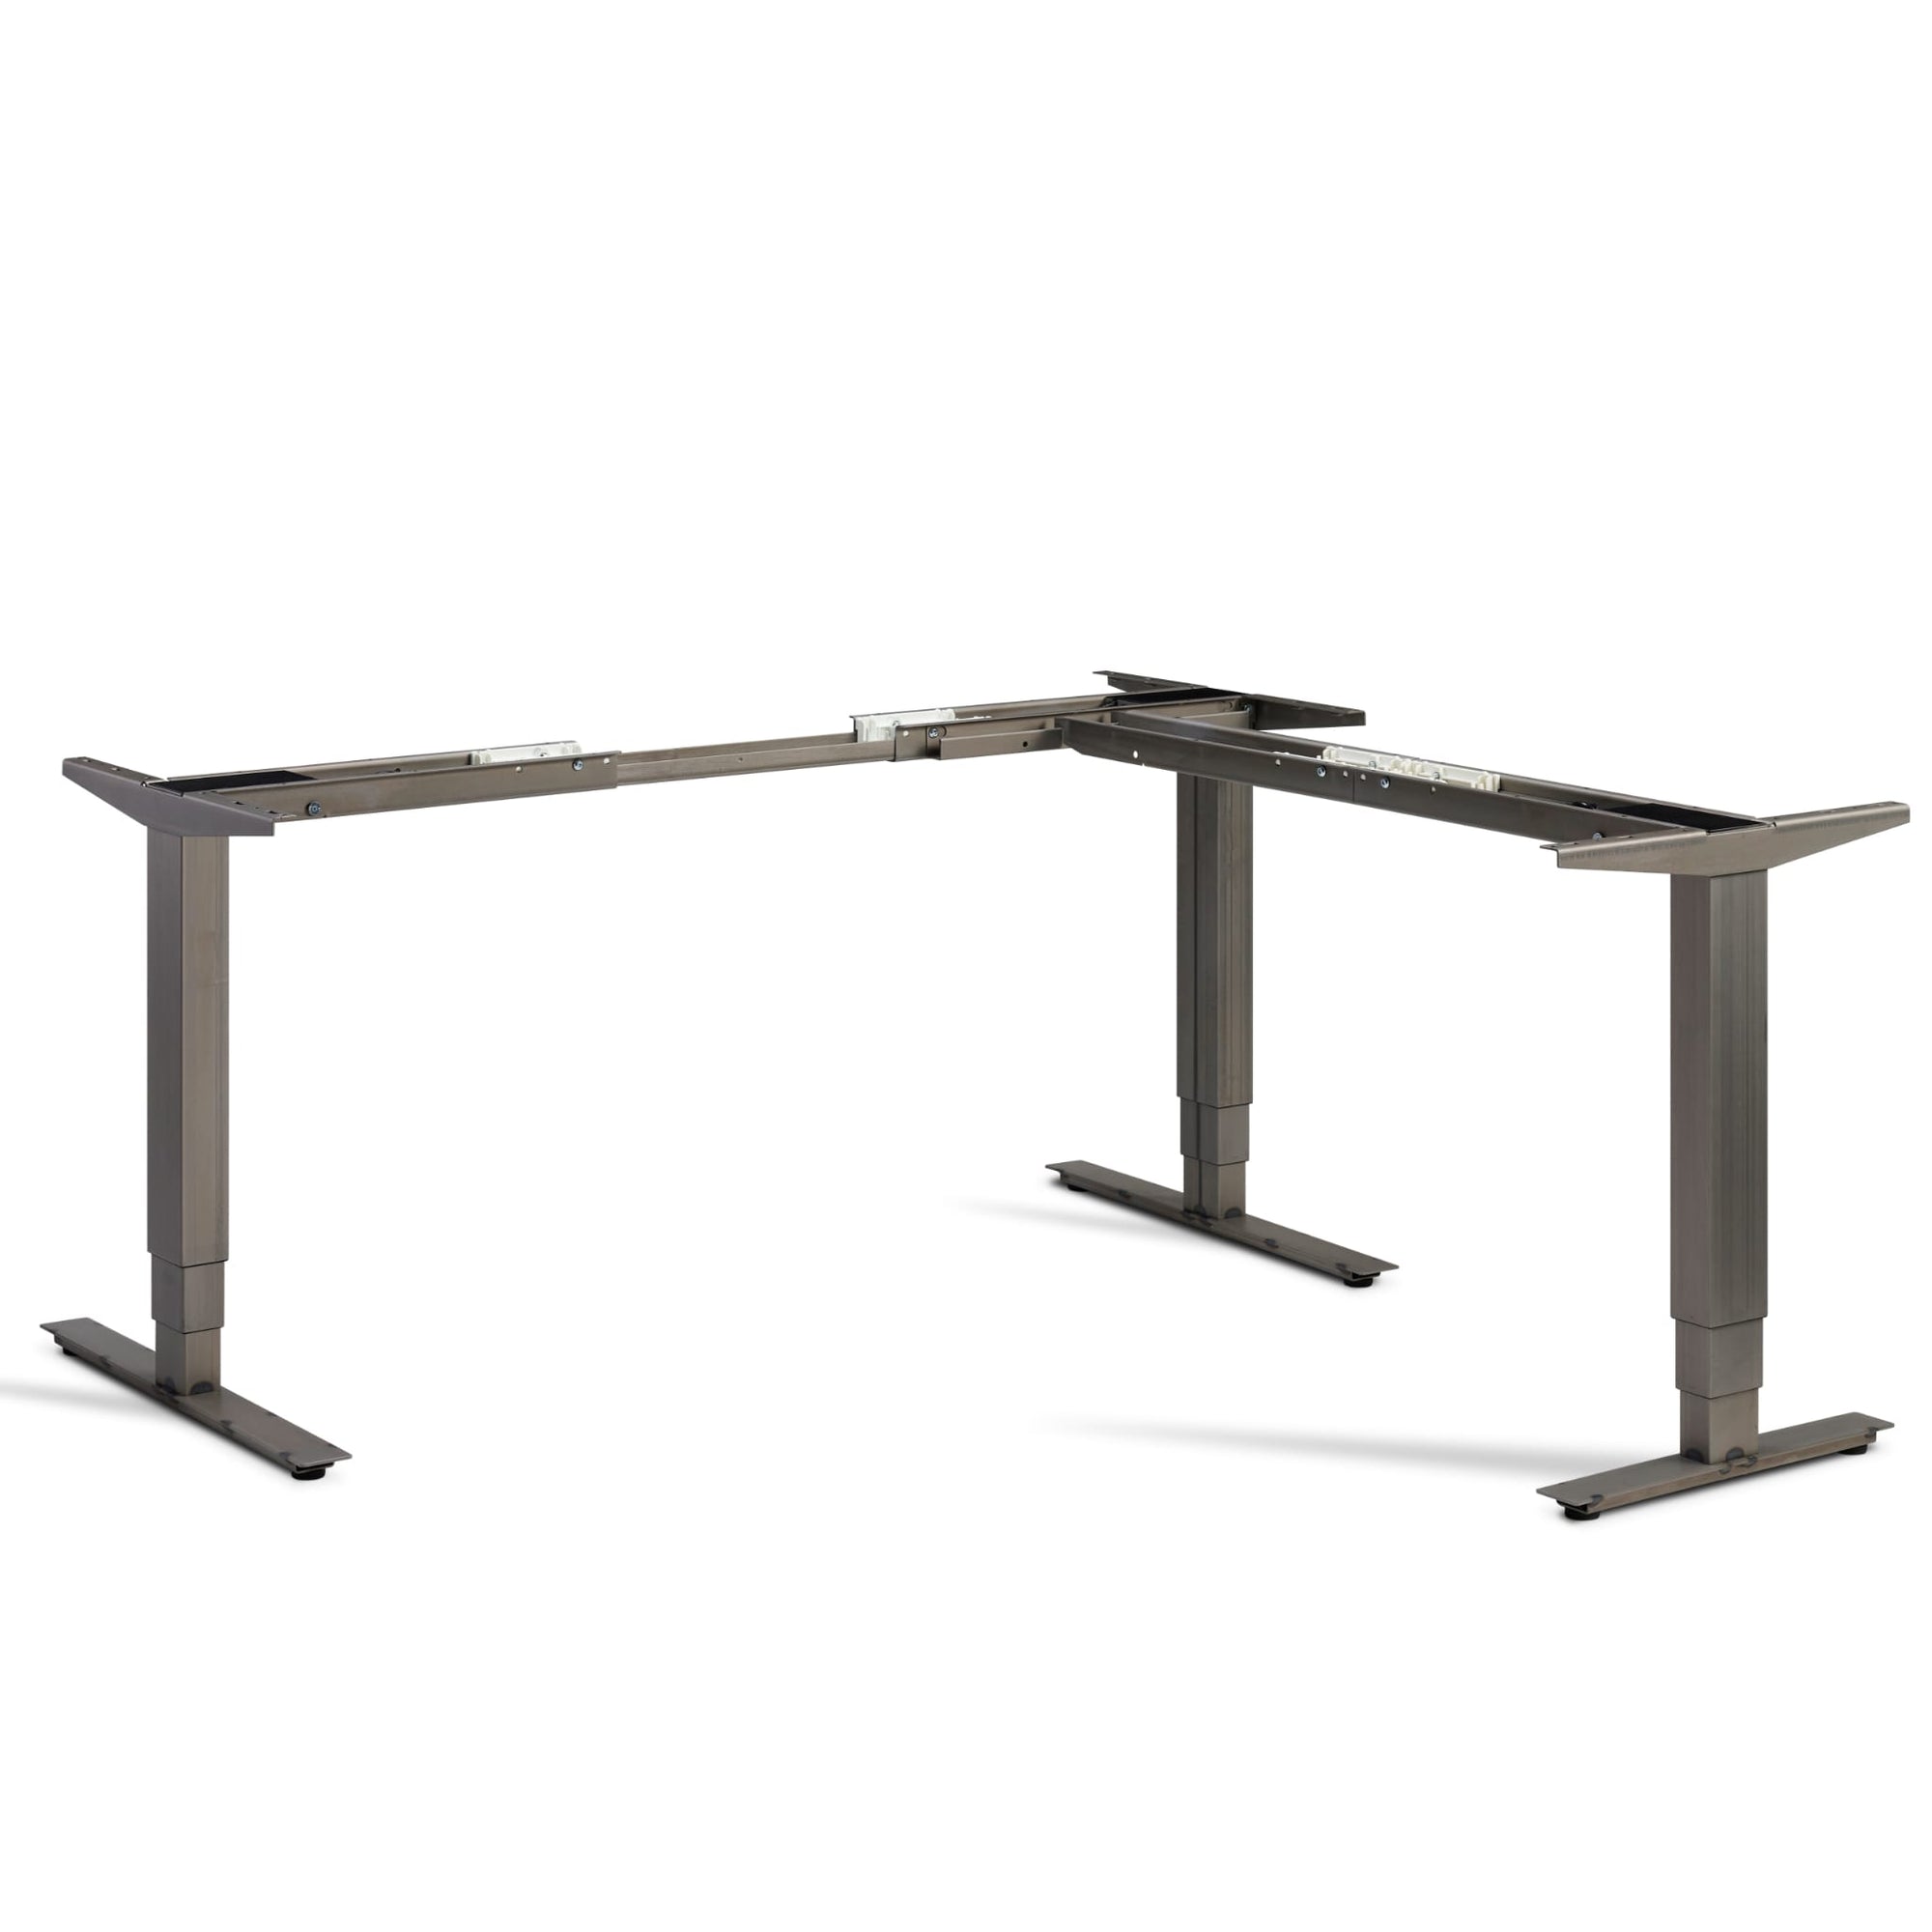 Masta corner standing desk frame in raw steel finish viewed from the front